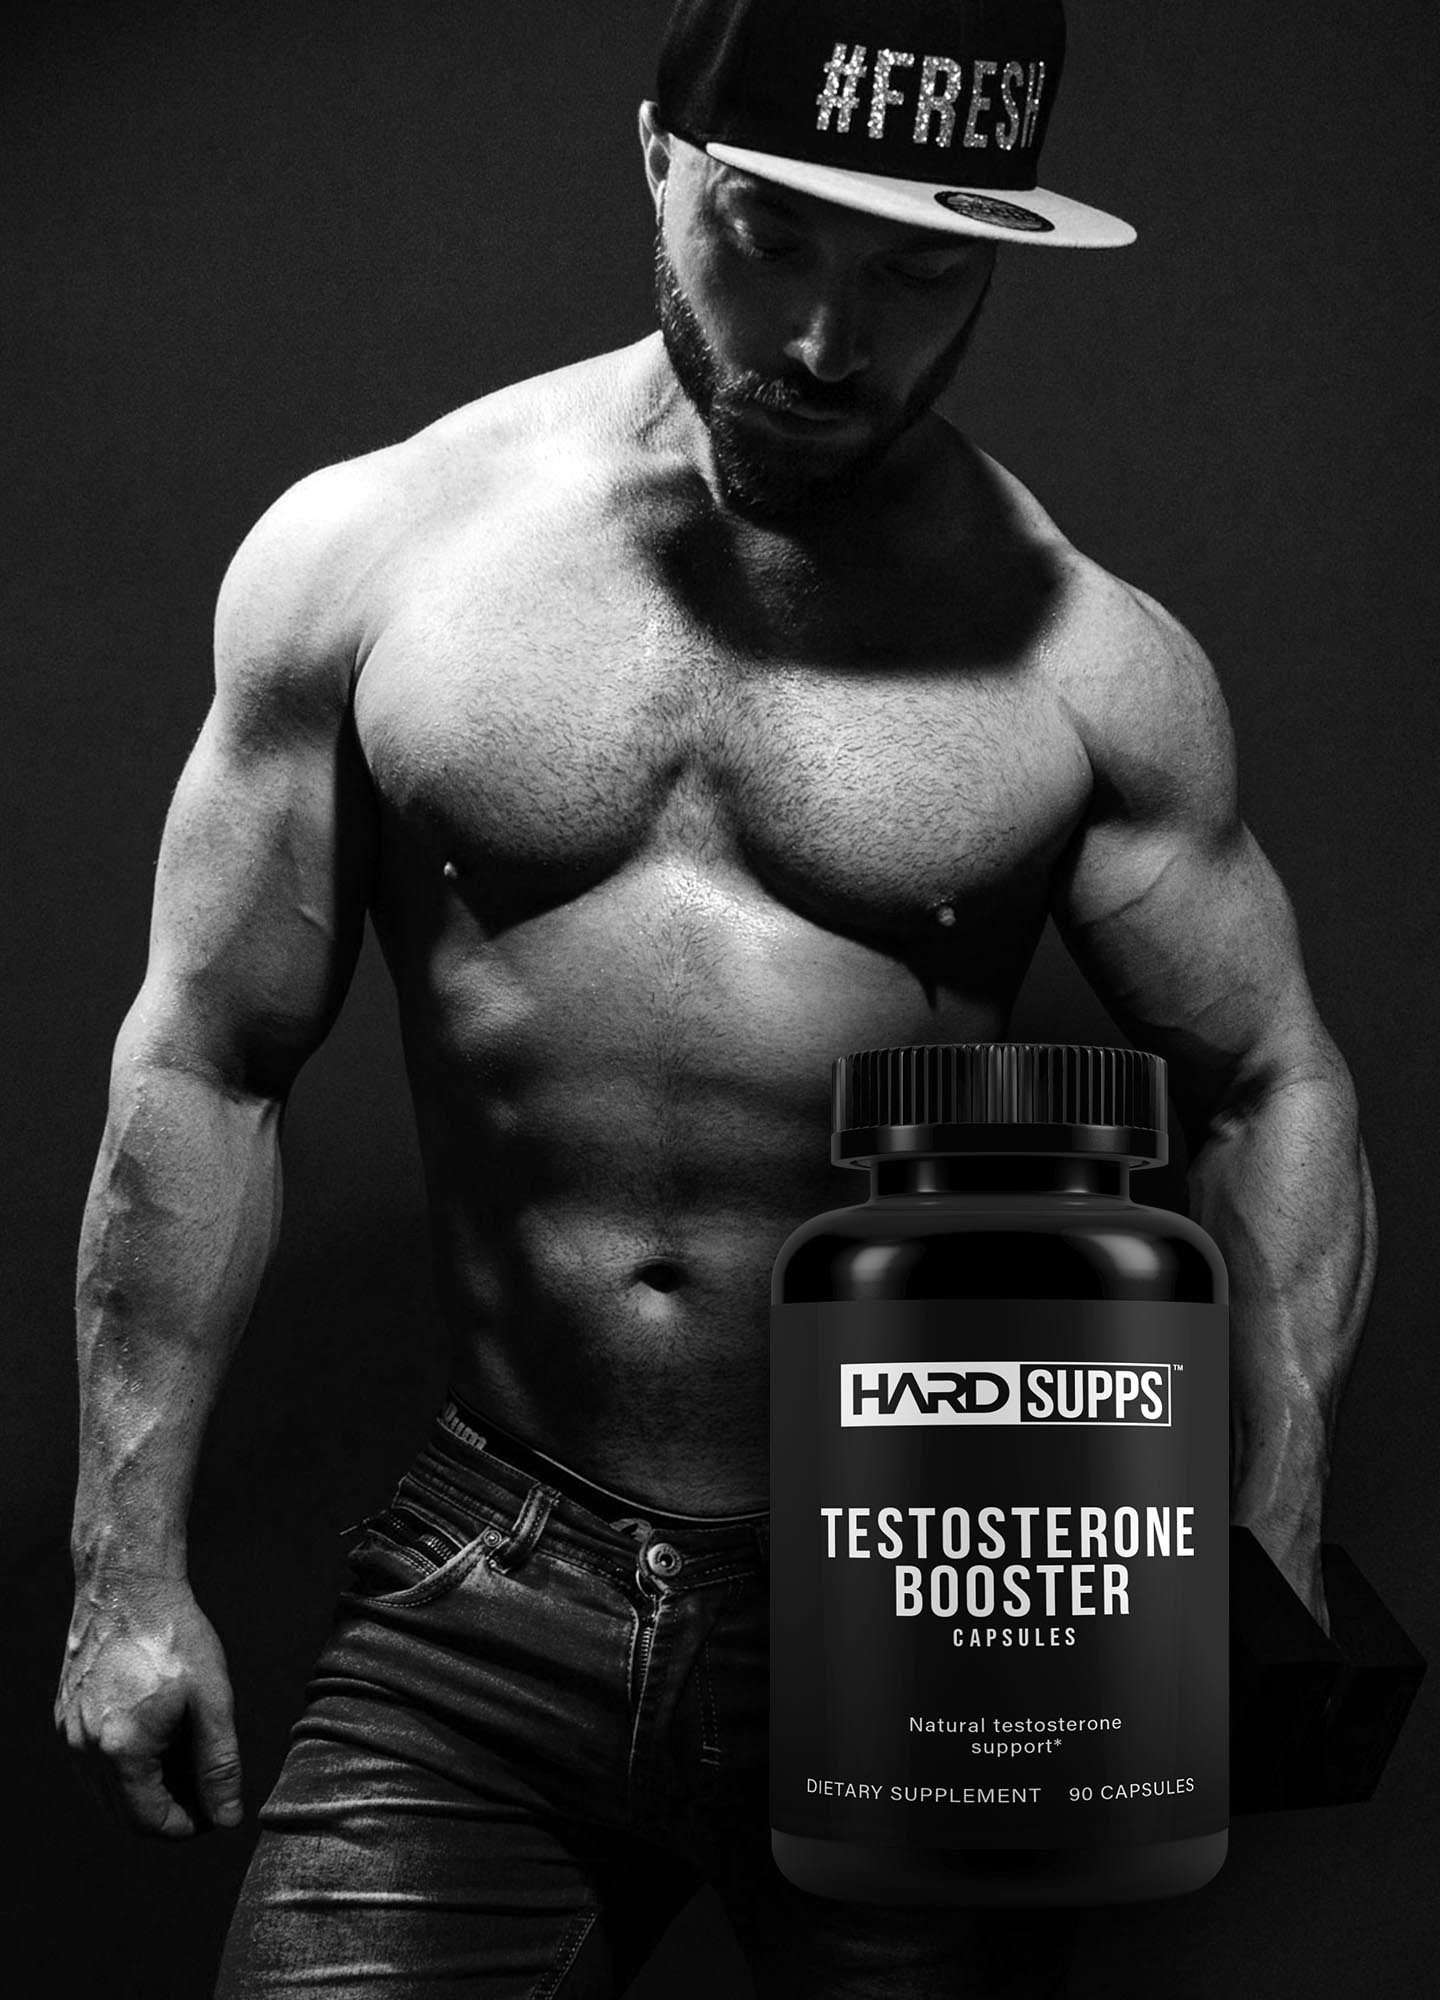 PUMP IT UP: Boost Your Testosterone and Unleash Your Inner Stud – by Maxwell Alexander, Fitness Model, Certified Fitness Trainer, Certified Bodybuilding, and Sports Nutrition Coach – Presented by HARD SUPPS